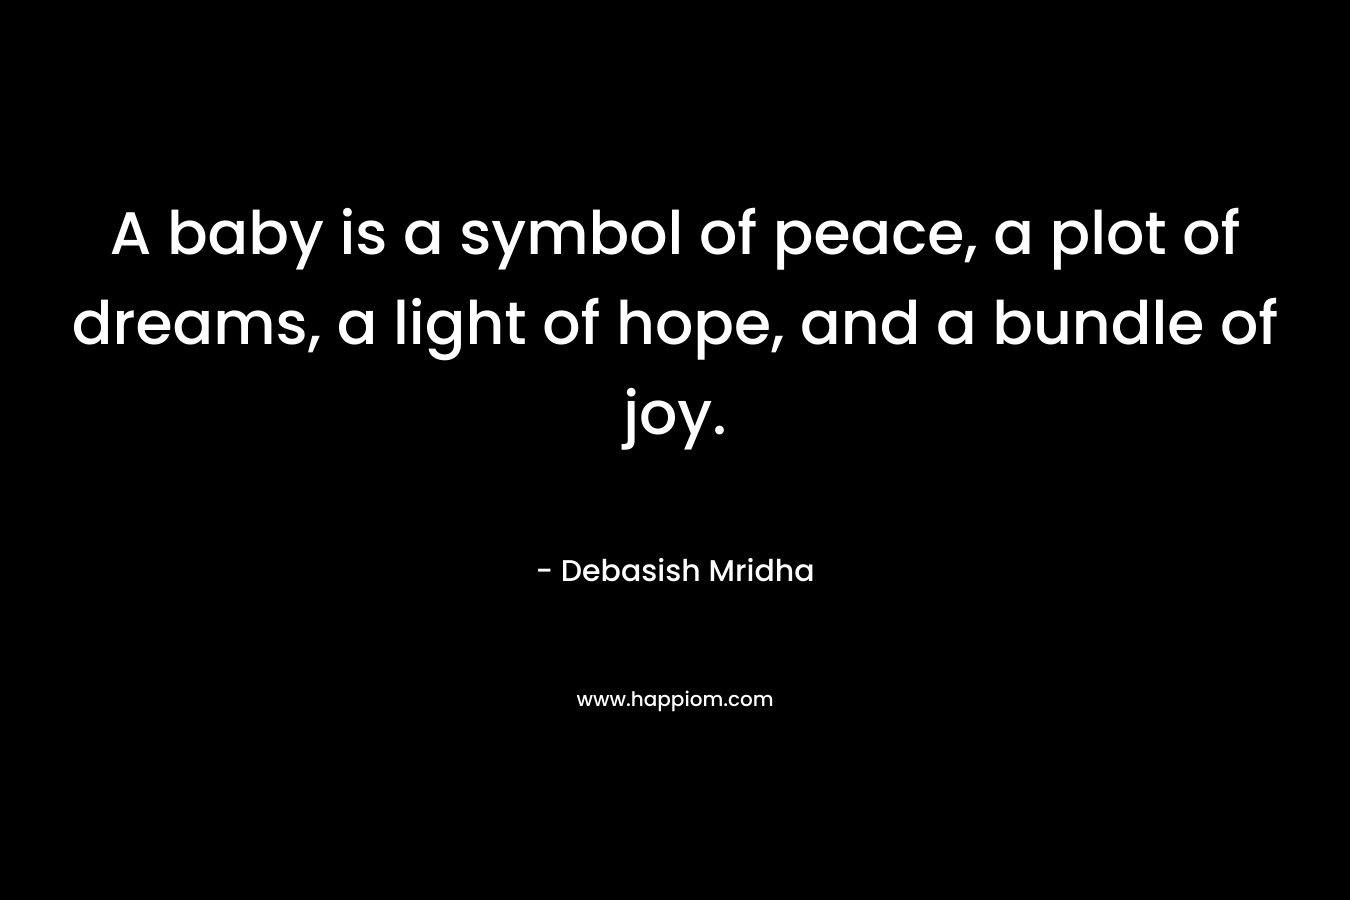 A baby is a symbol of peace, a plot of dreams, a light of hope, and a bundle of joy. – Debasish Mridha